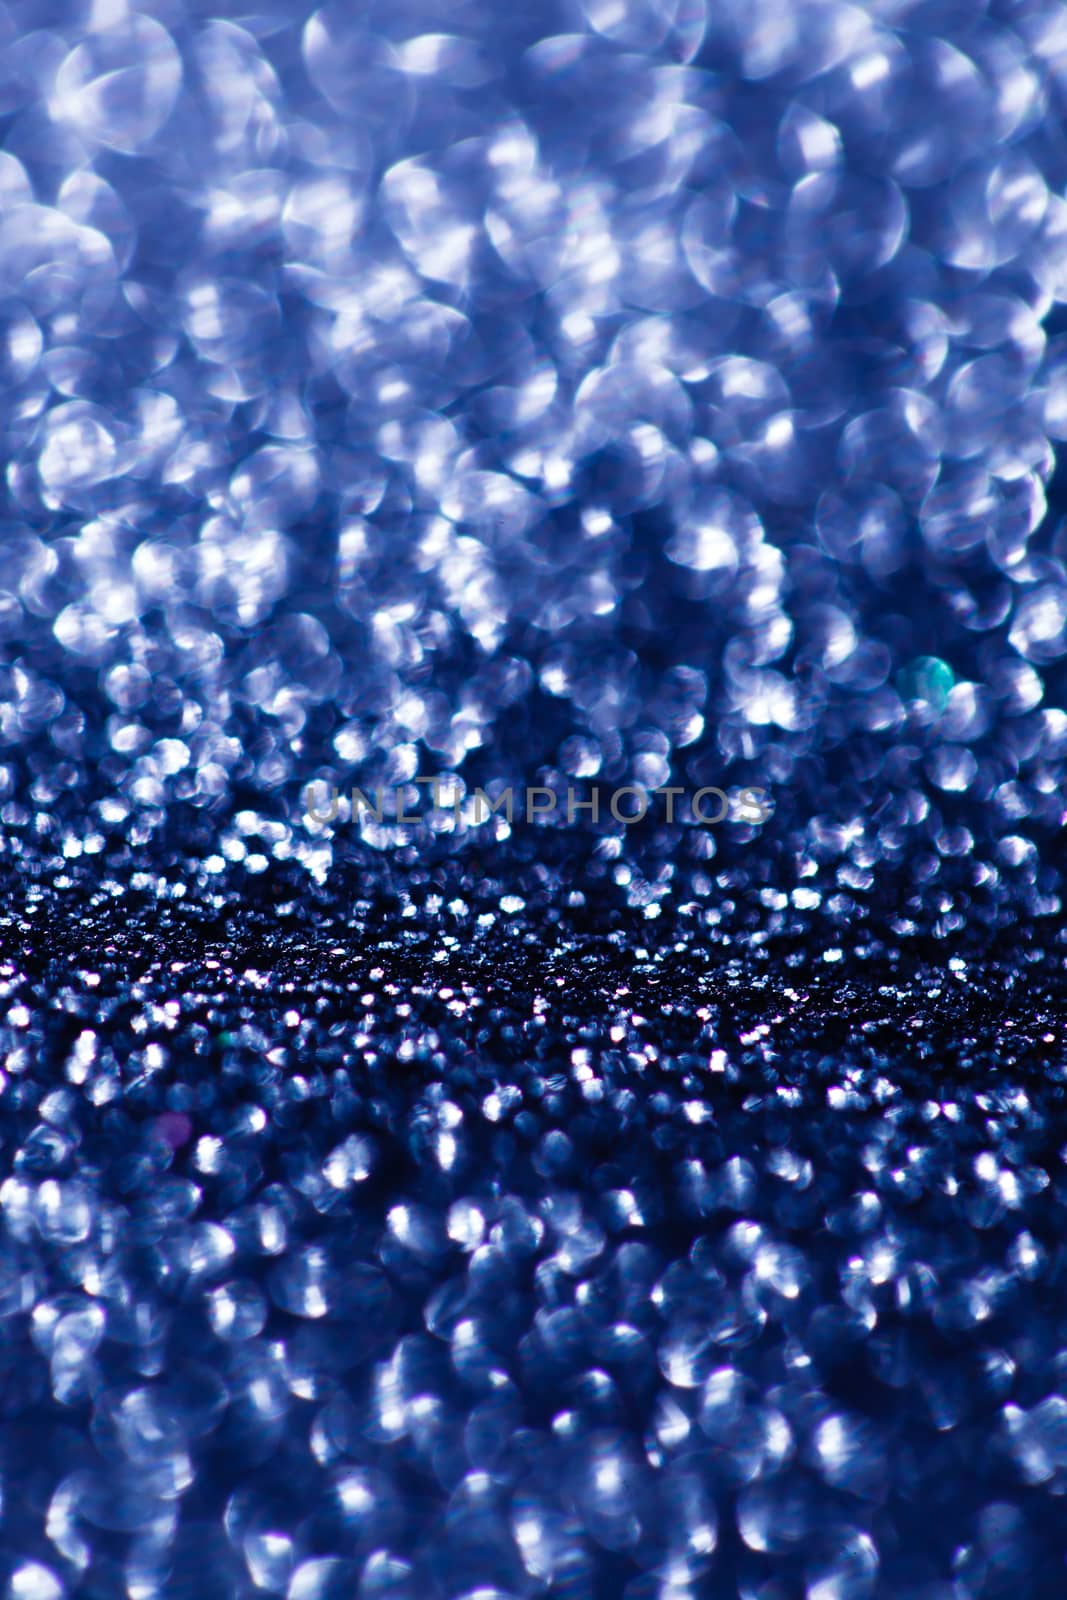 Defocused abstract blue lights background by shebeko